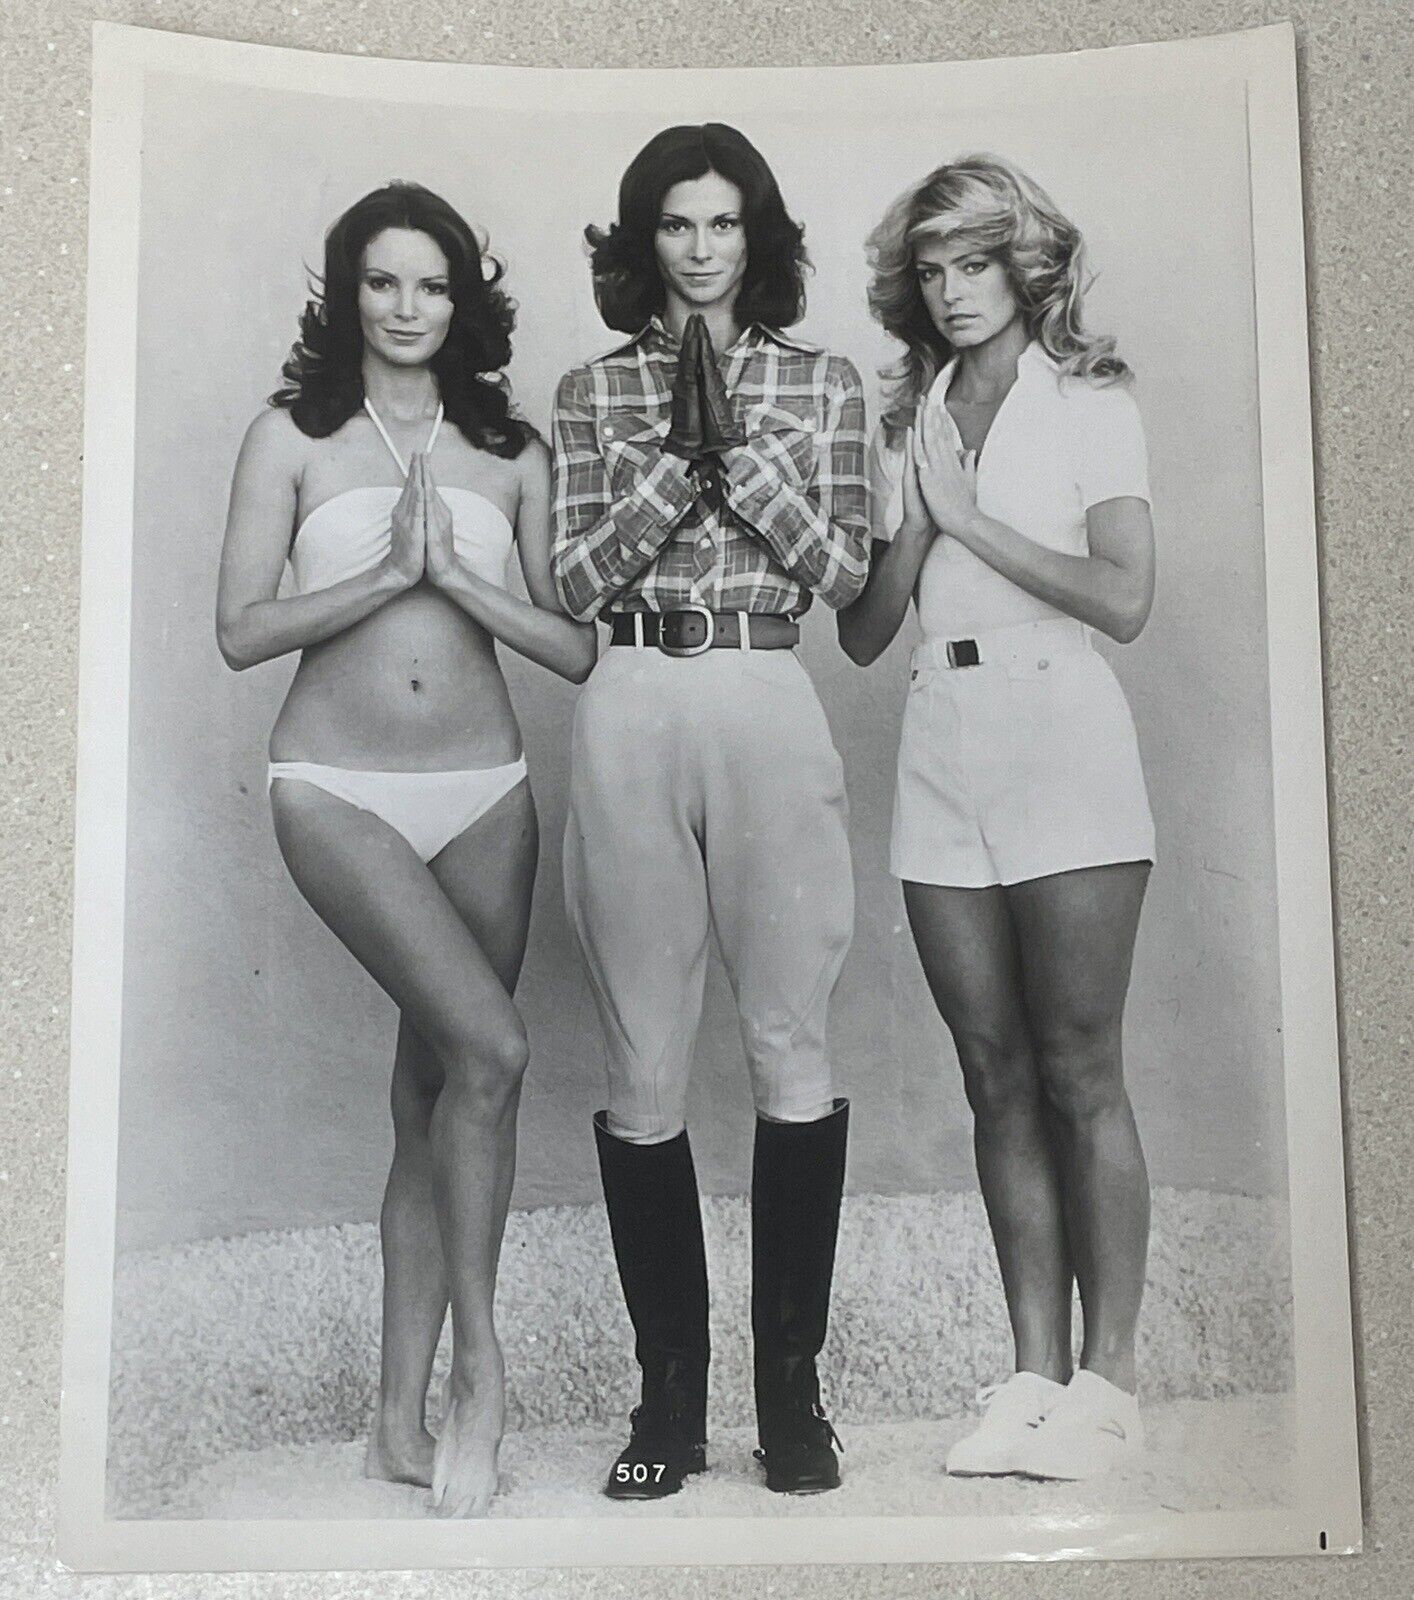 Charlie’s Angels, Chuck’s Chicks 8x10 Appears To Be From Original Negatives